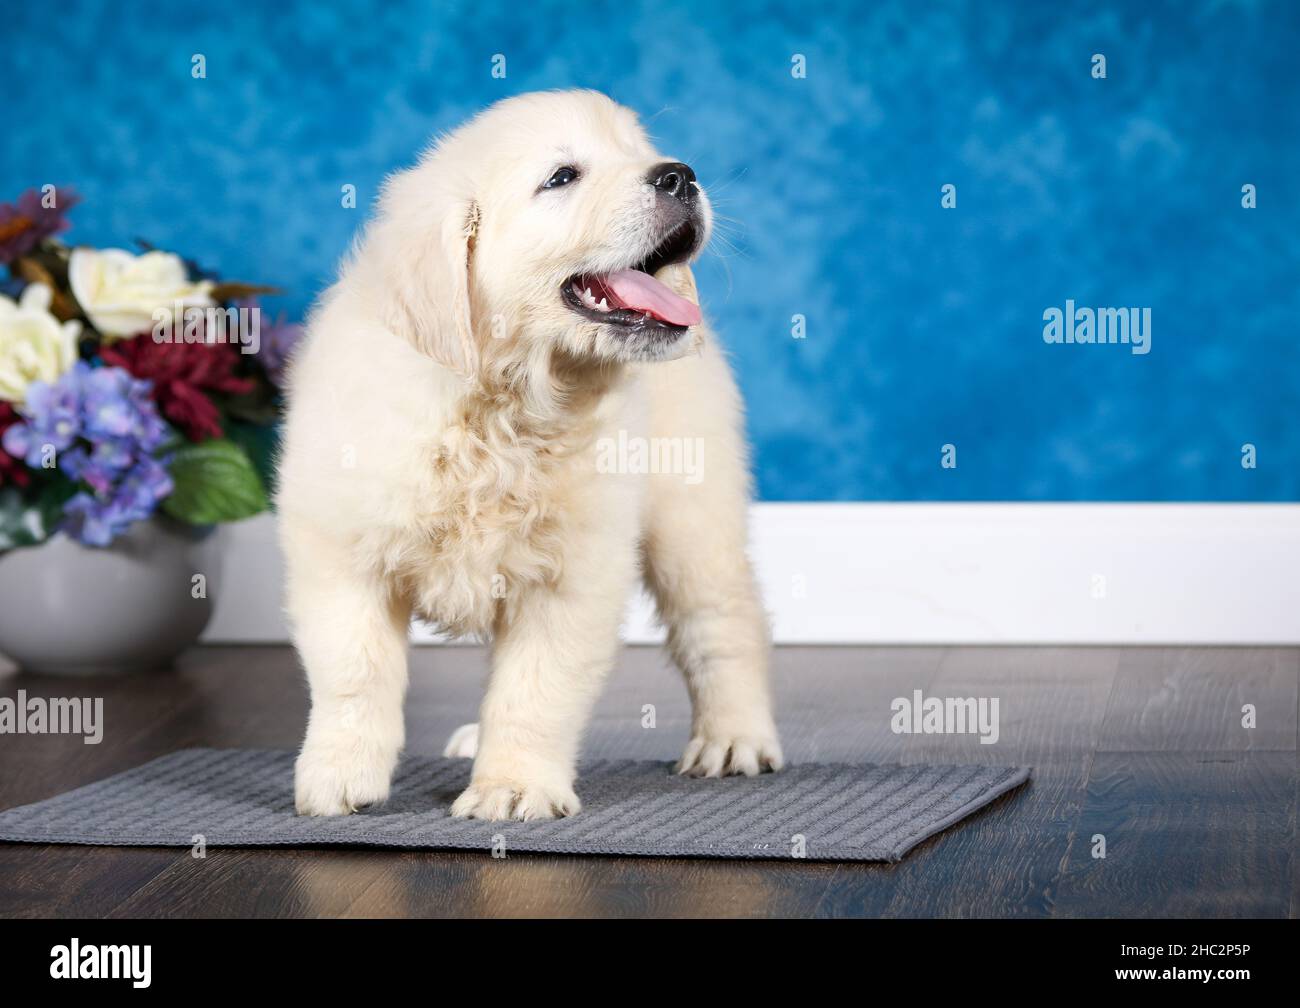 English Cream Golden Retriever puppy sticking out tongue in room with blue wall Stock Photo